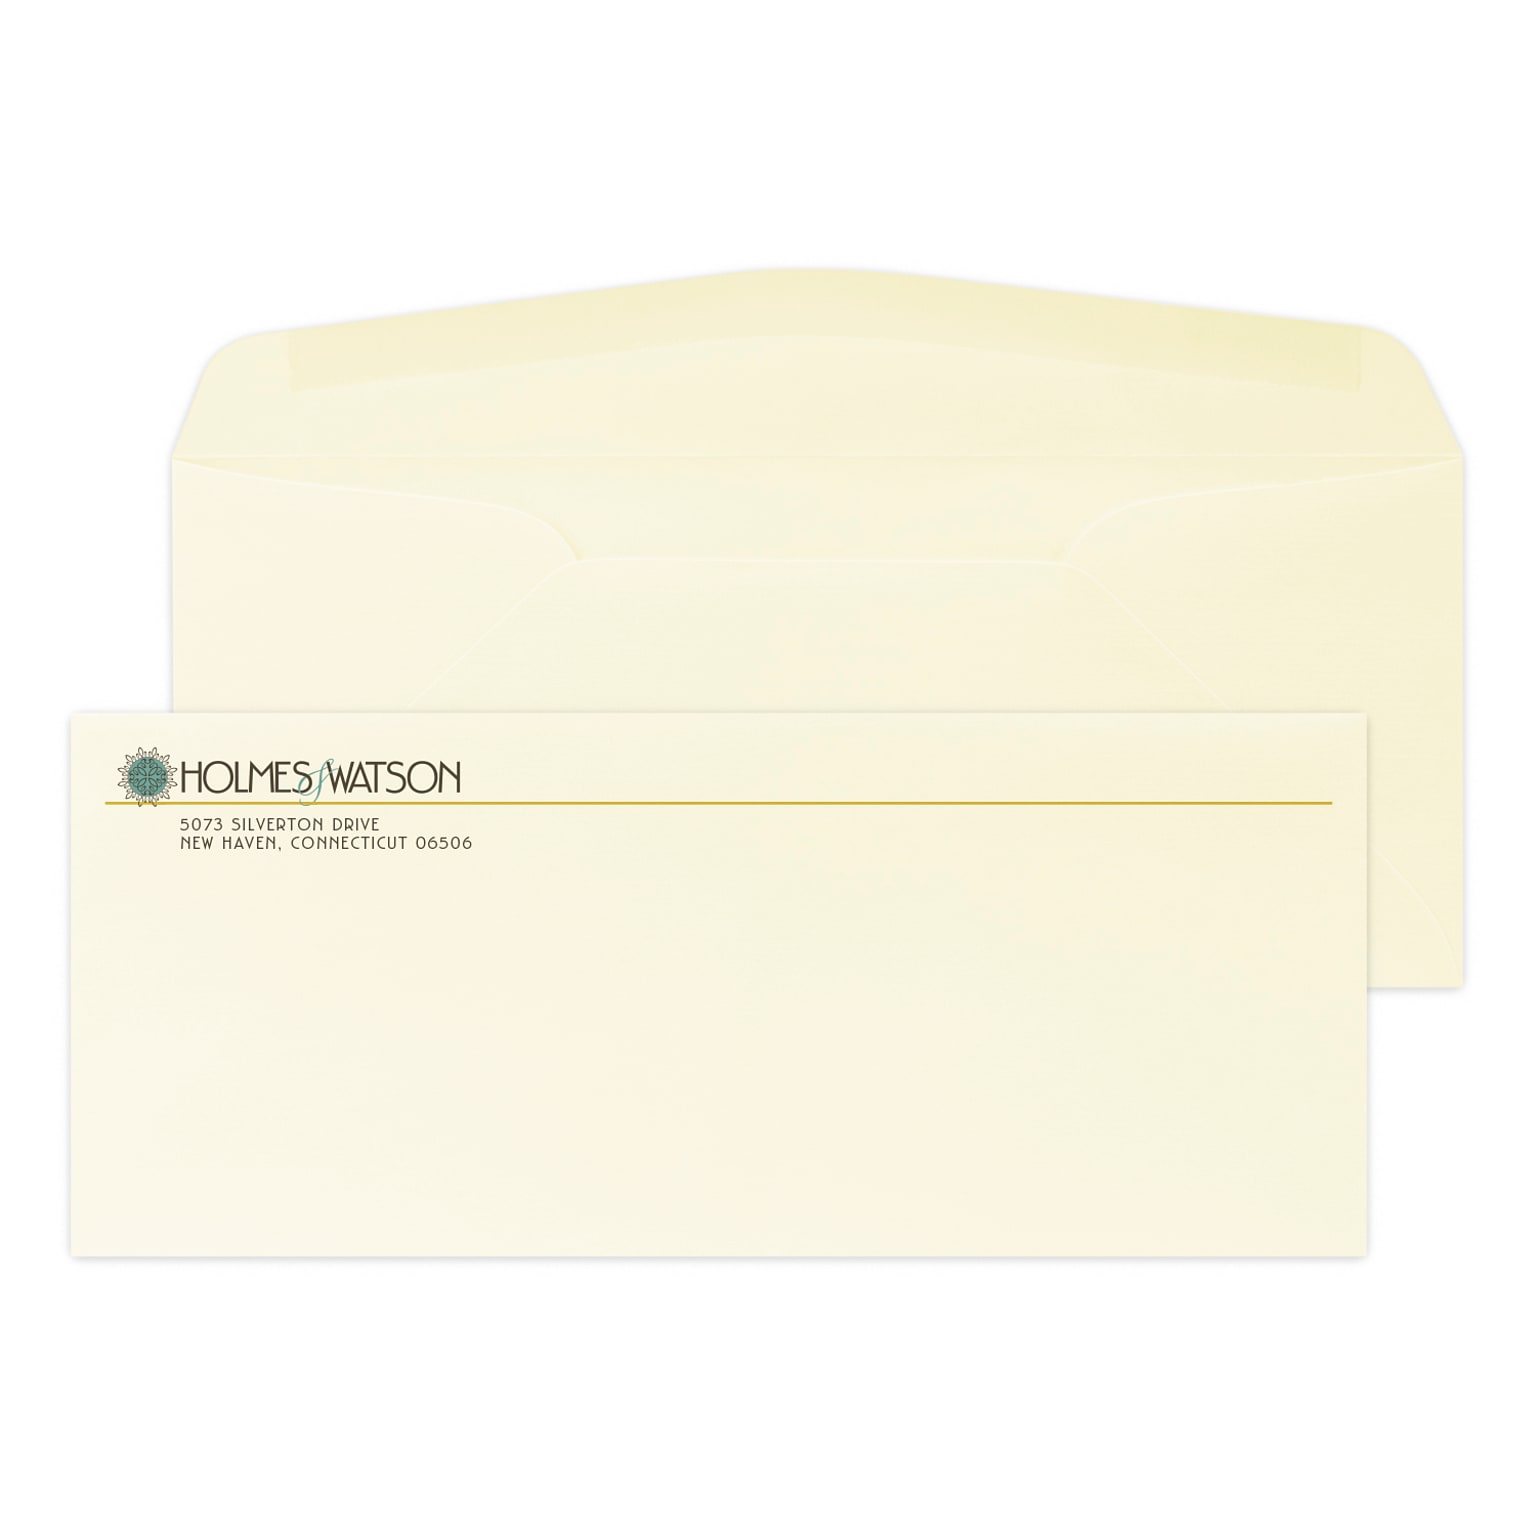 Custom Full Color #10 Stationery Envelopes, 4 1/4 x 9 1/2, 24# CLASSIC® LAID Baronial Ivory, Flat Ink, 250 / Pack